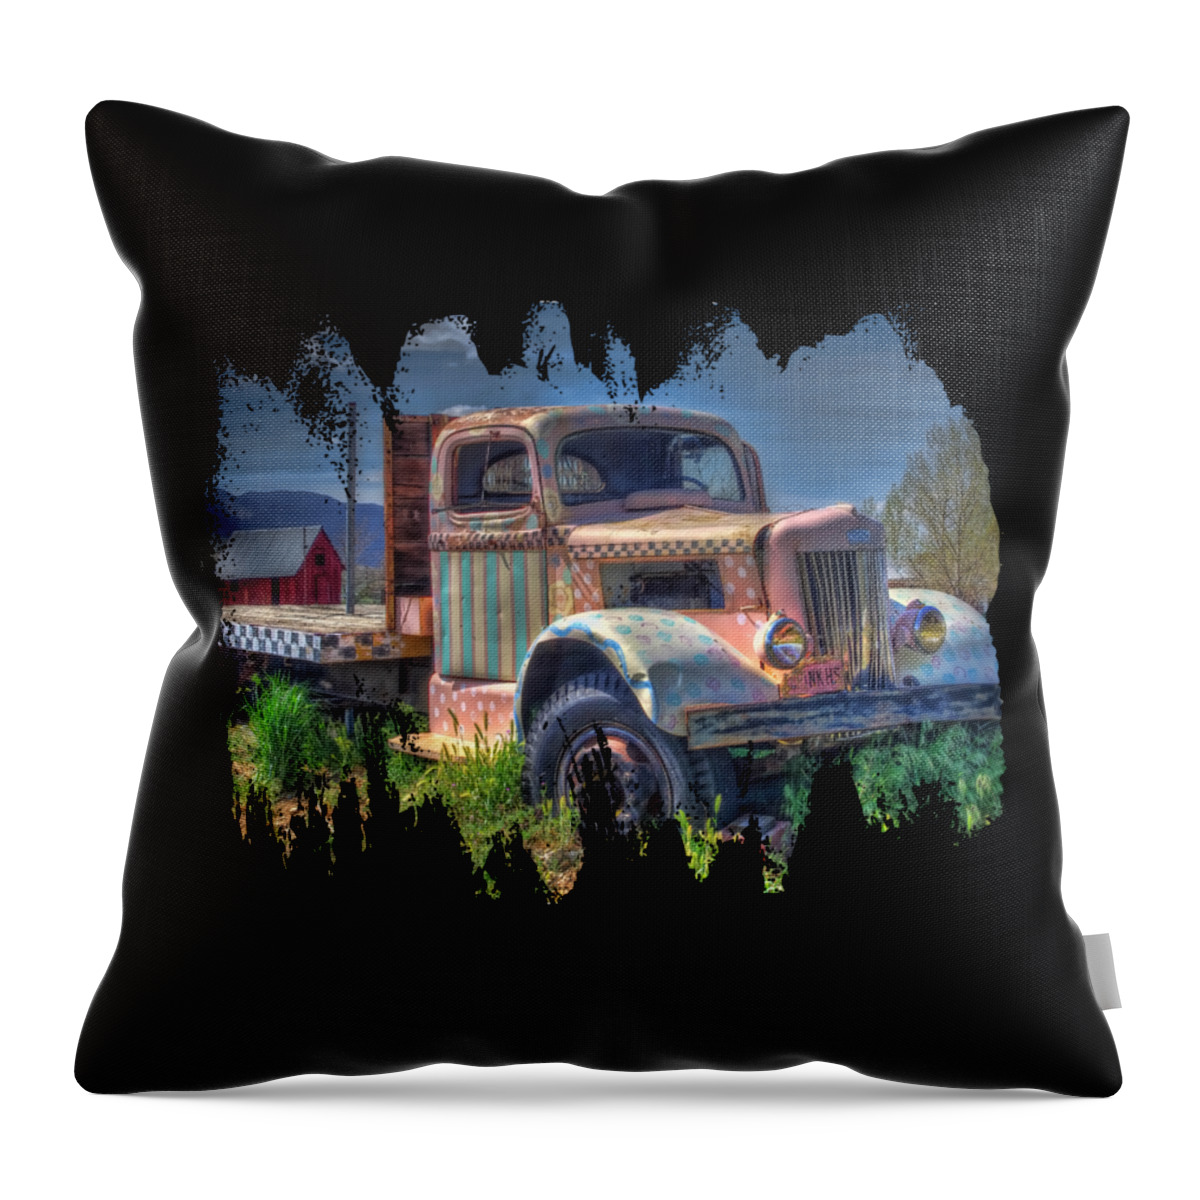 Old Truck Prints For Sale Throw Pillow featuring the photograph Classic Flatbed Truck In Pink by Thom Zehrfeld